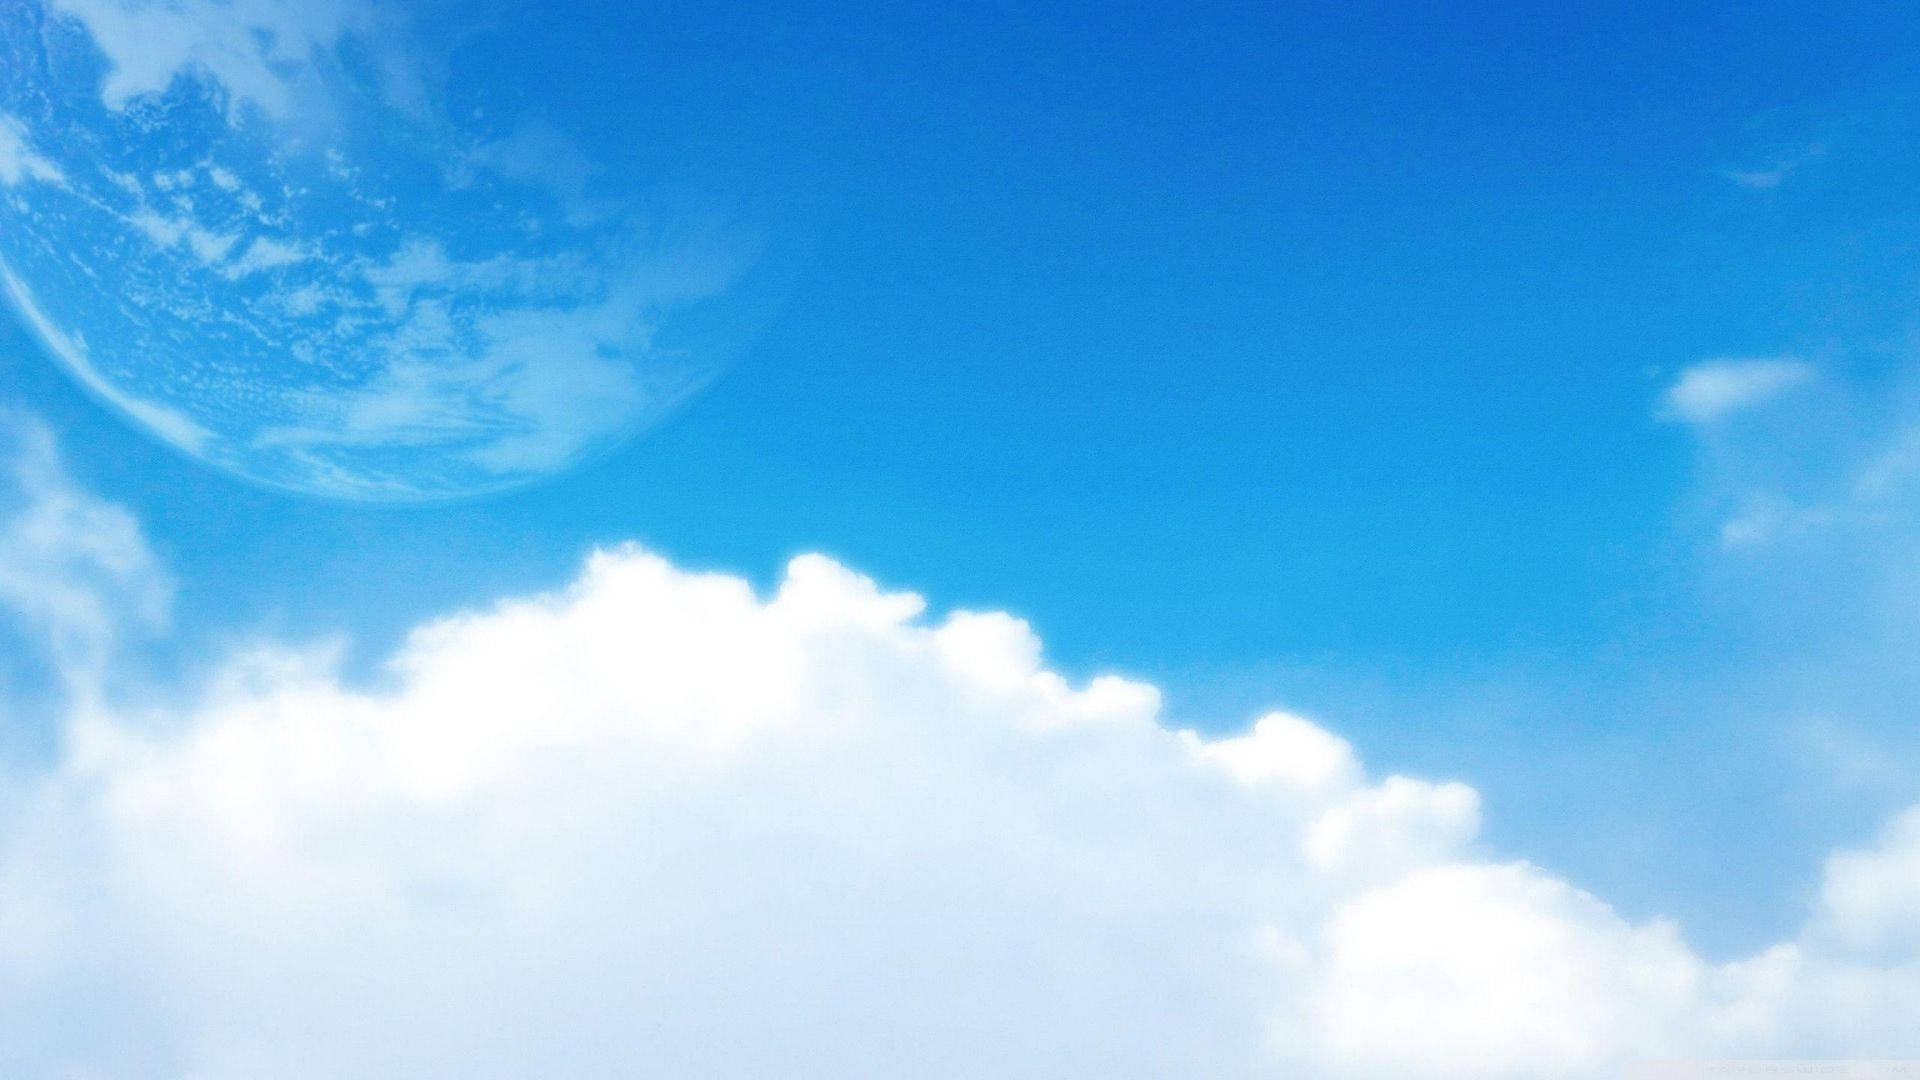 Free Sky Wallpaper Downloads, [1500+] Sky Wallpapers for FREE | Wallpapers .com